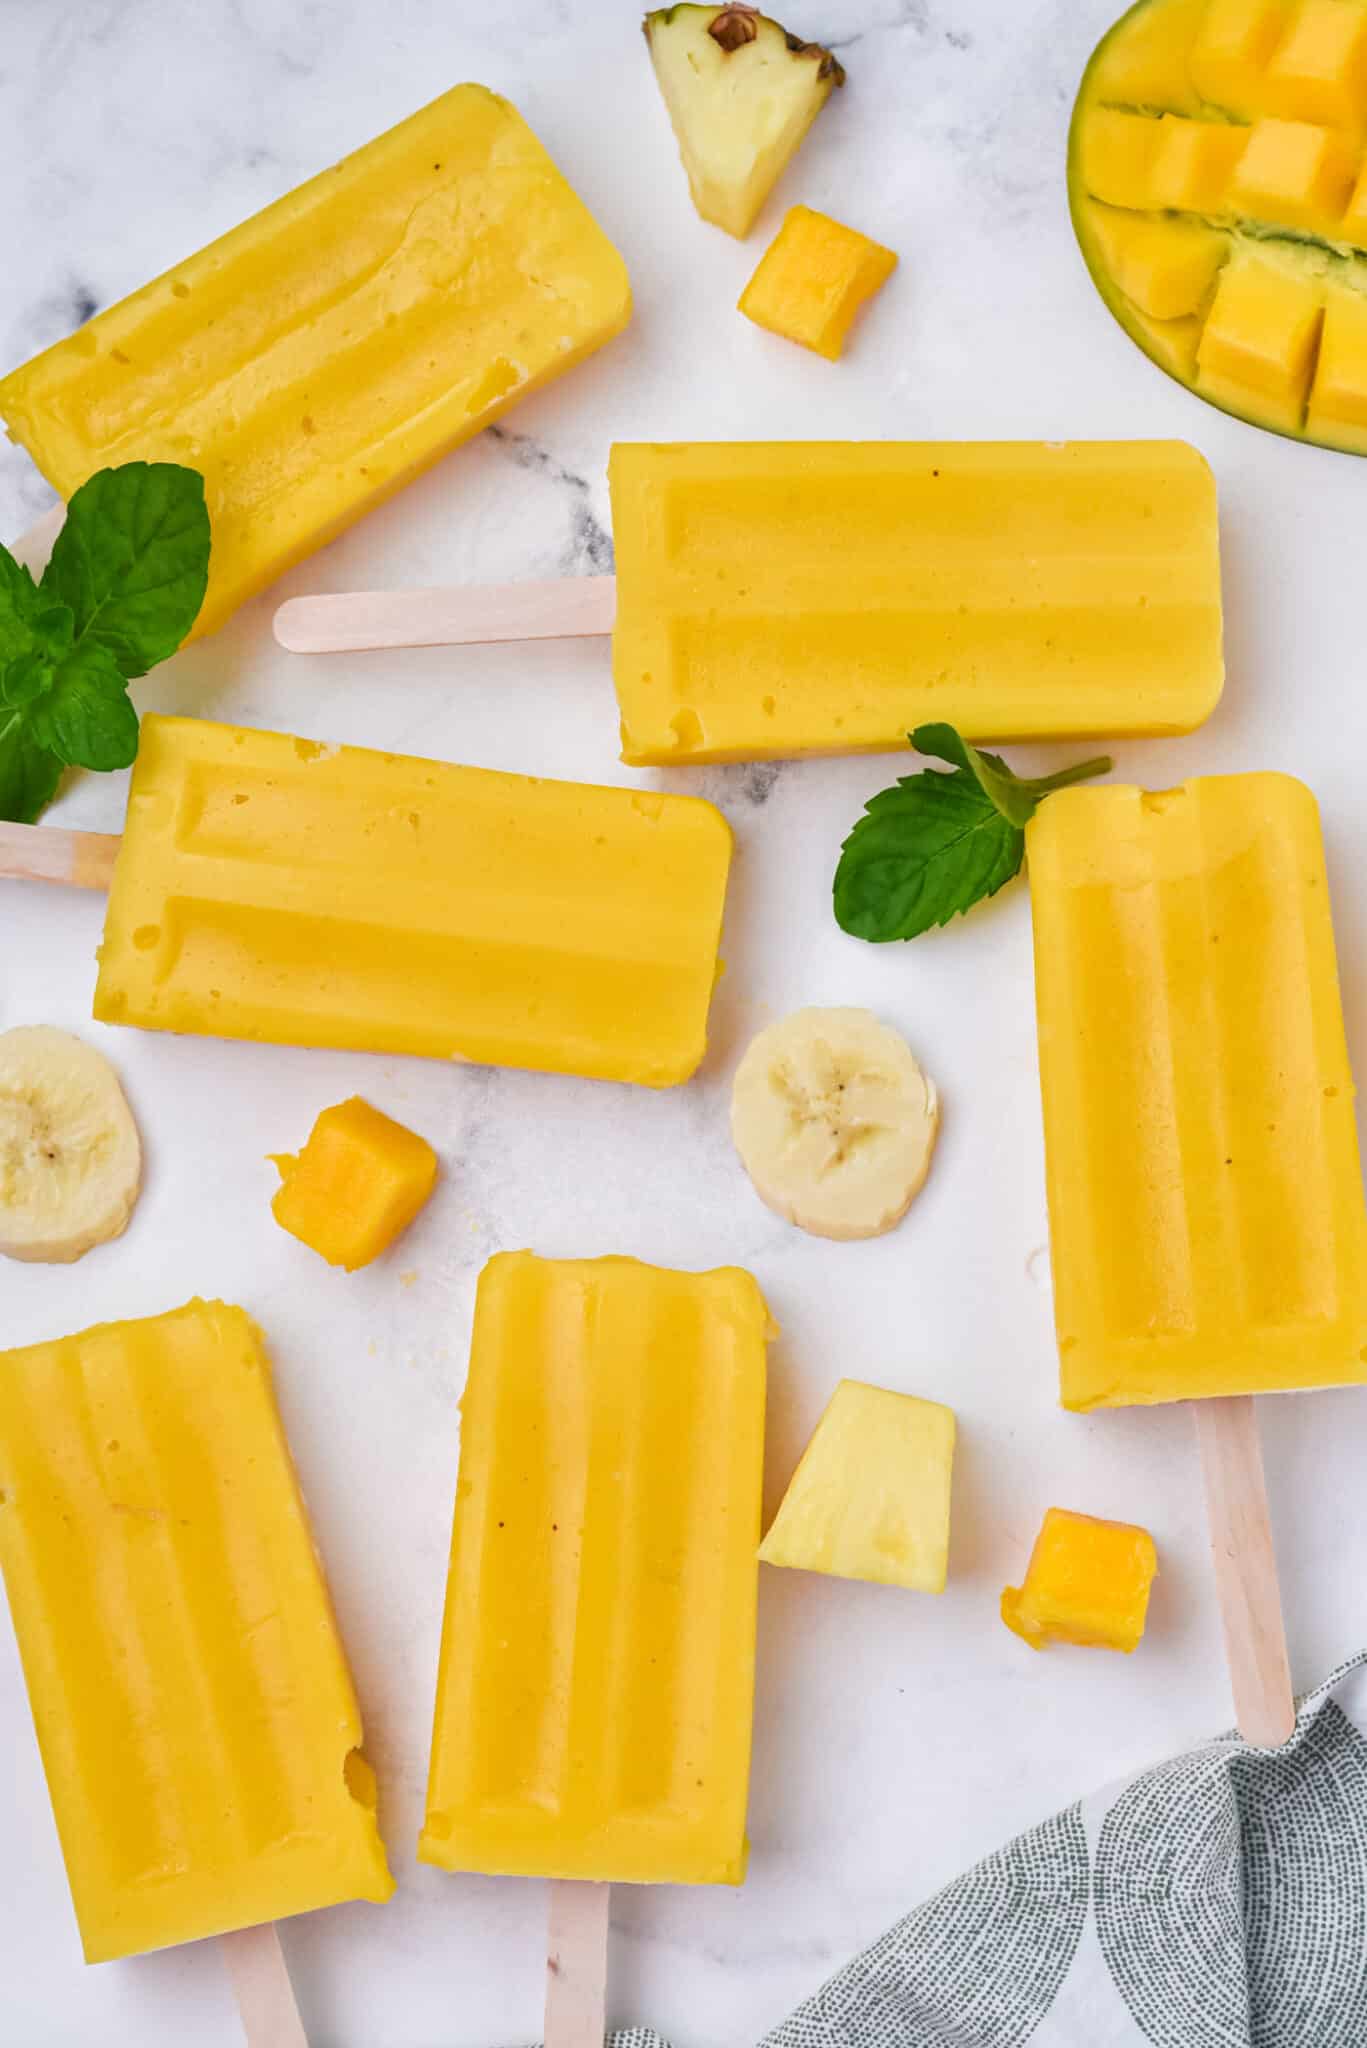 Mango popsicles set out on a white marble surface.